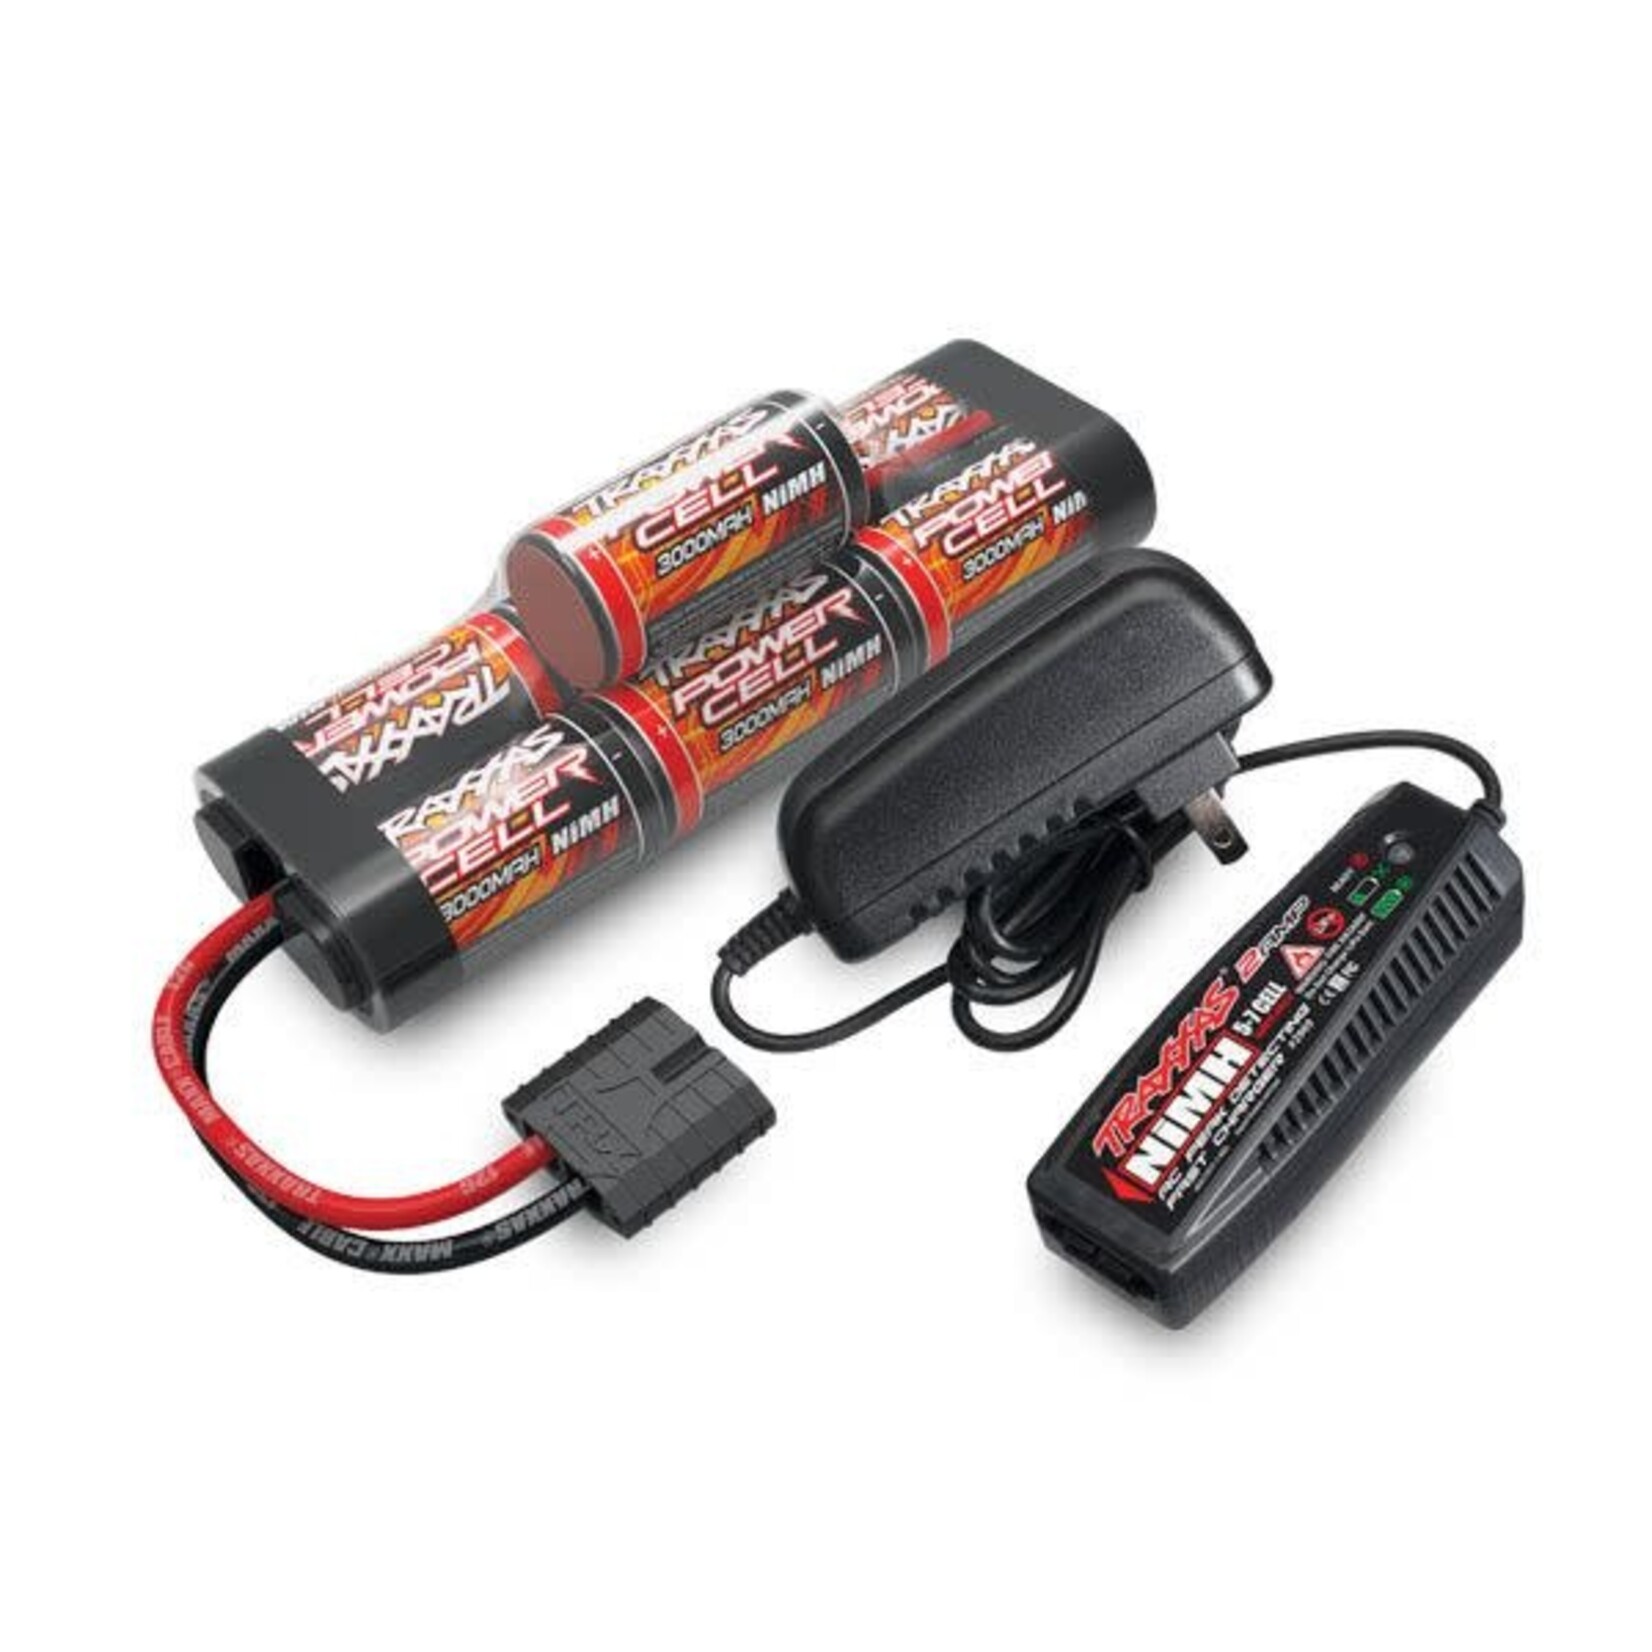 Traxxas 7-Cell NiMH Completter Pack Charger and Battery